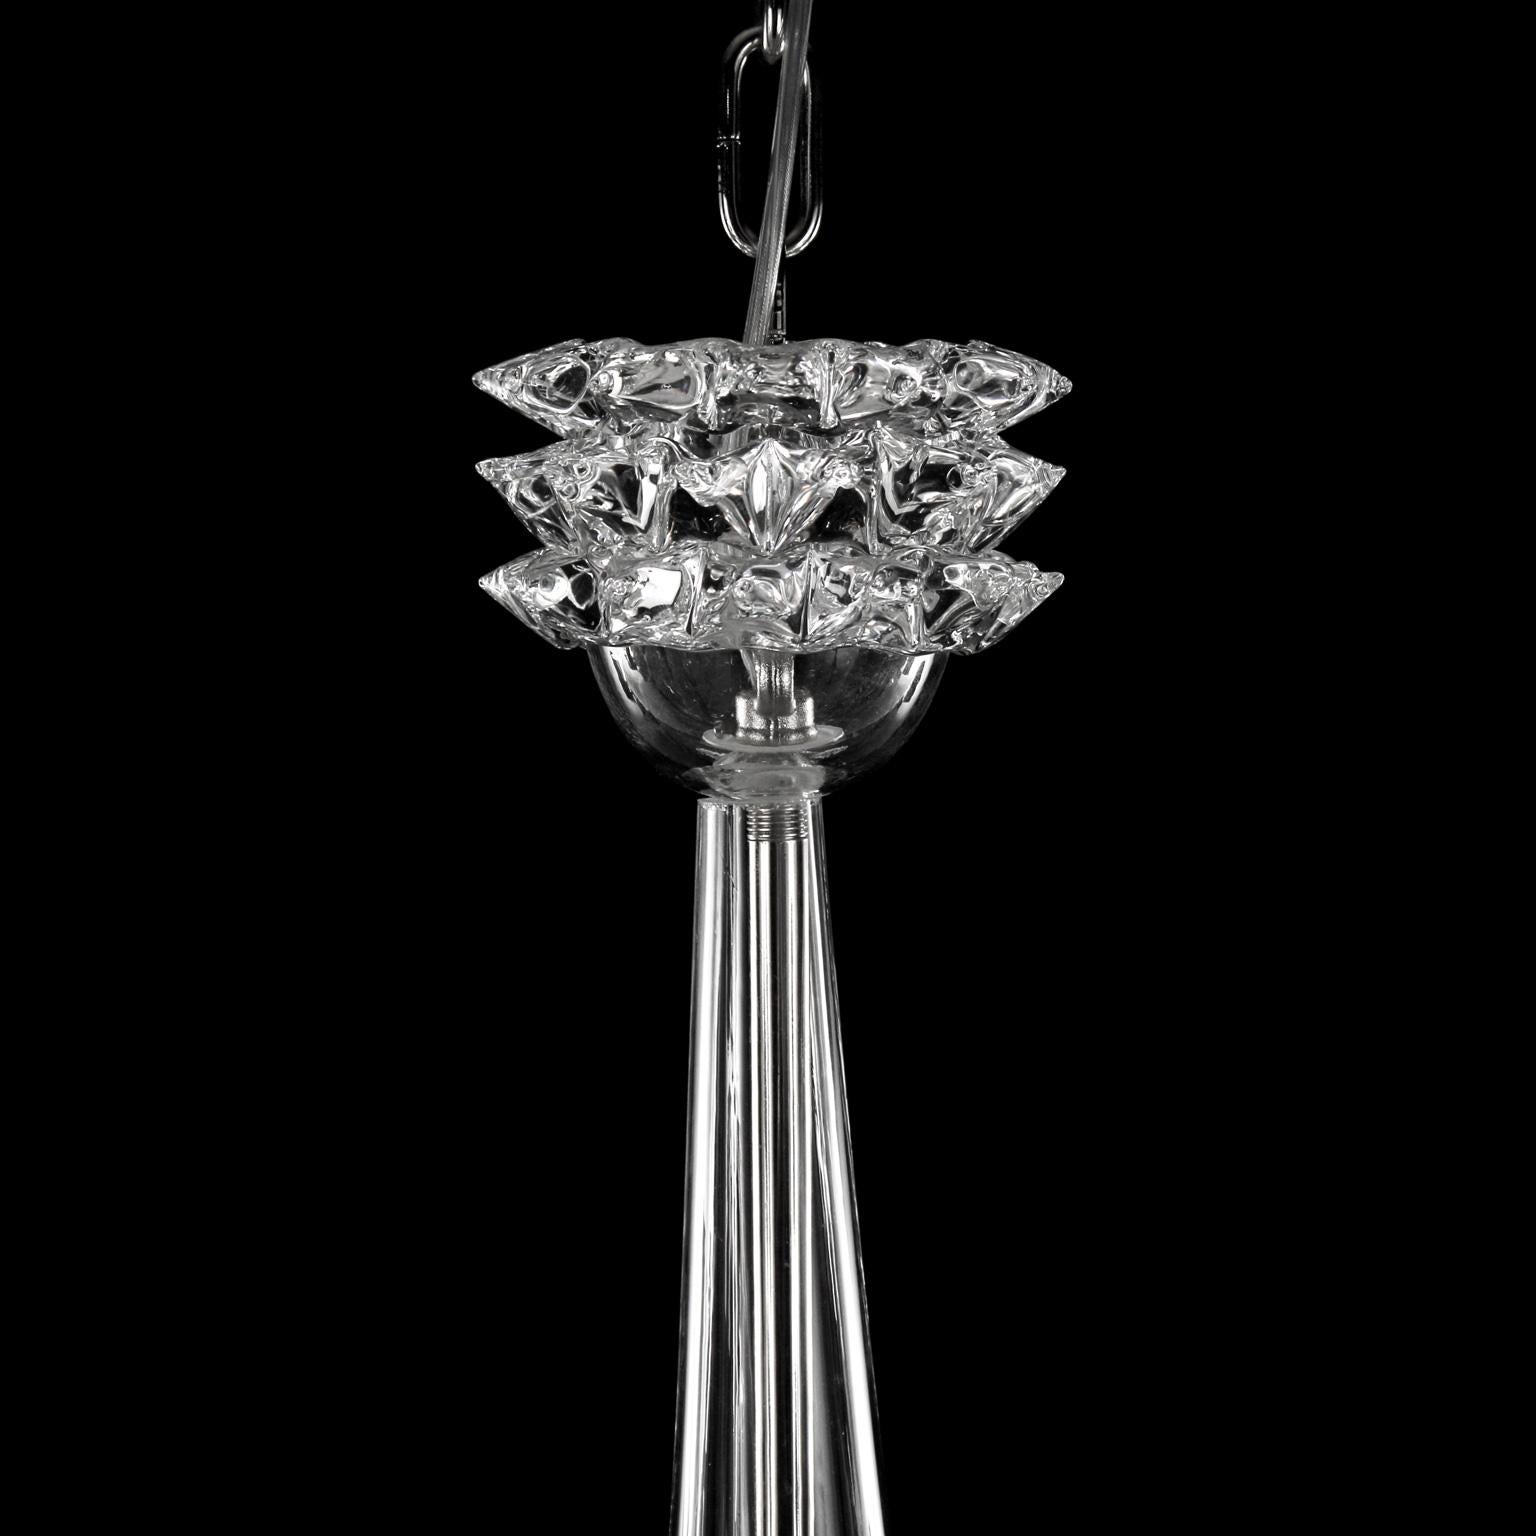 Chandelier 6+6 arms Crystal Murano Glass Clear Rostri Details by Multiforme In New Condition For Sale In Trebaseleghe, IT